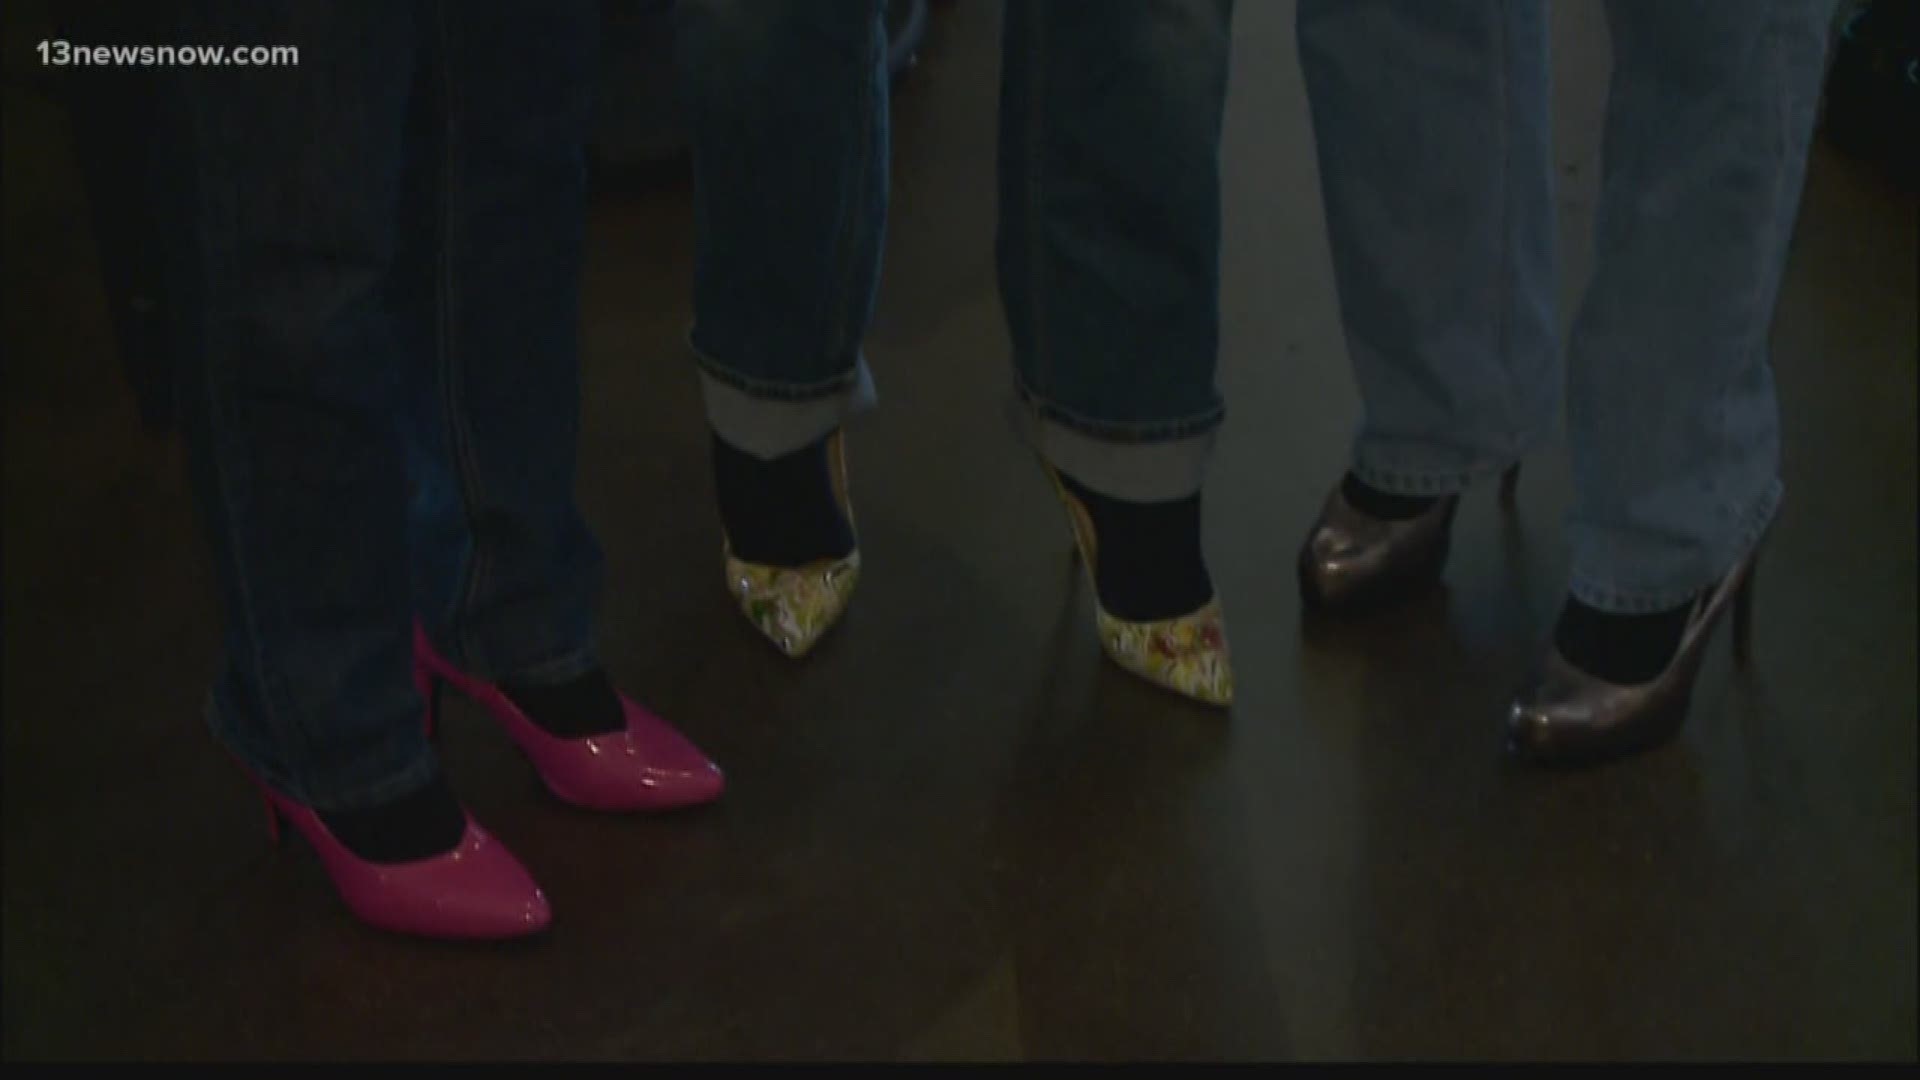 The 'Walk a Mile in Her Shoes' kick-off event